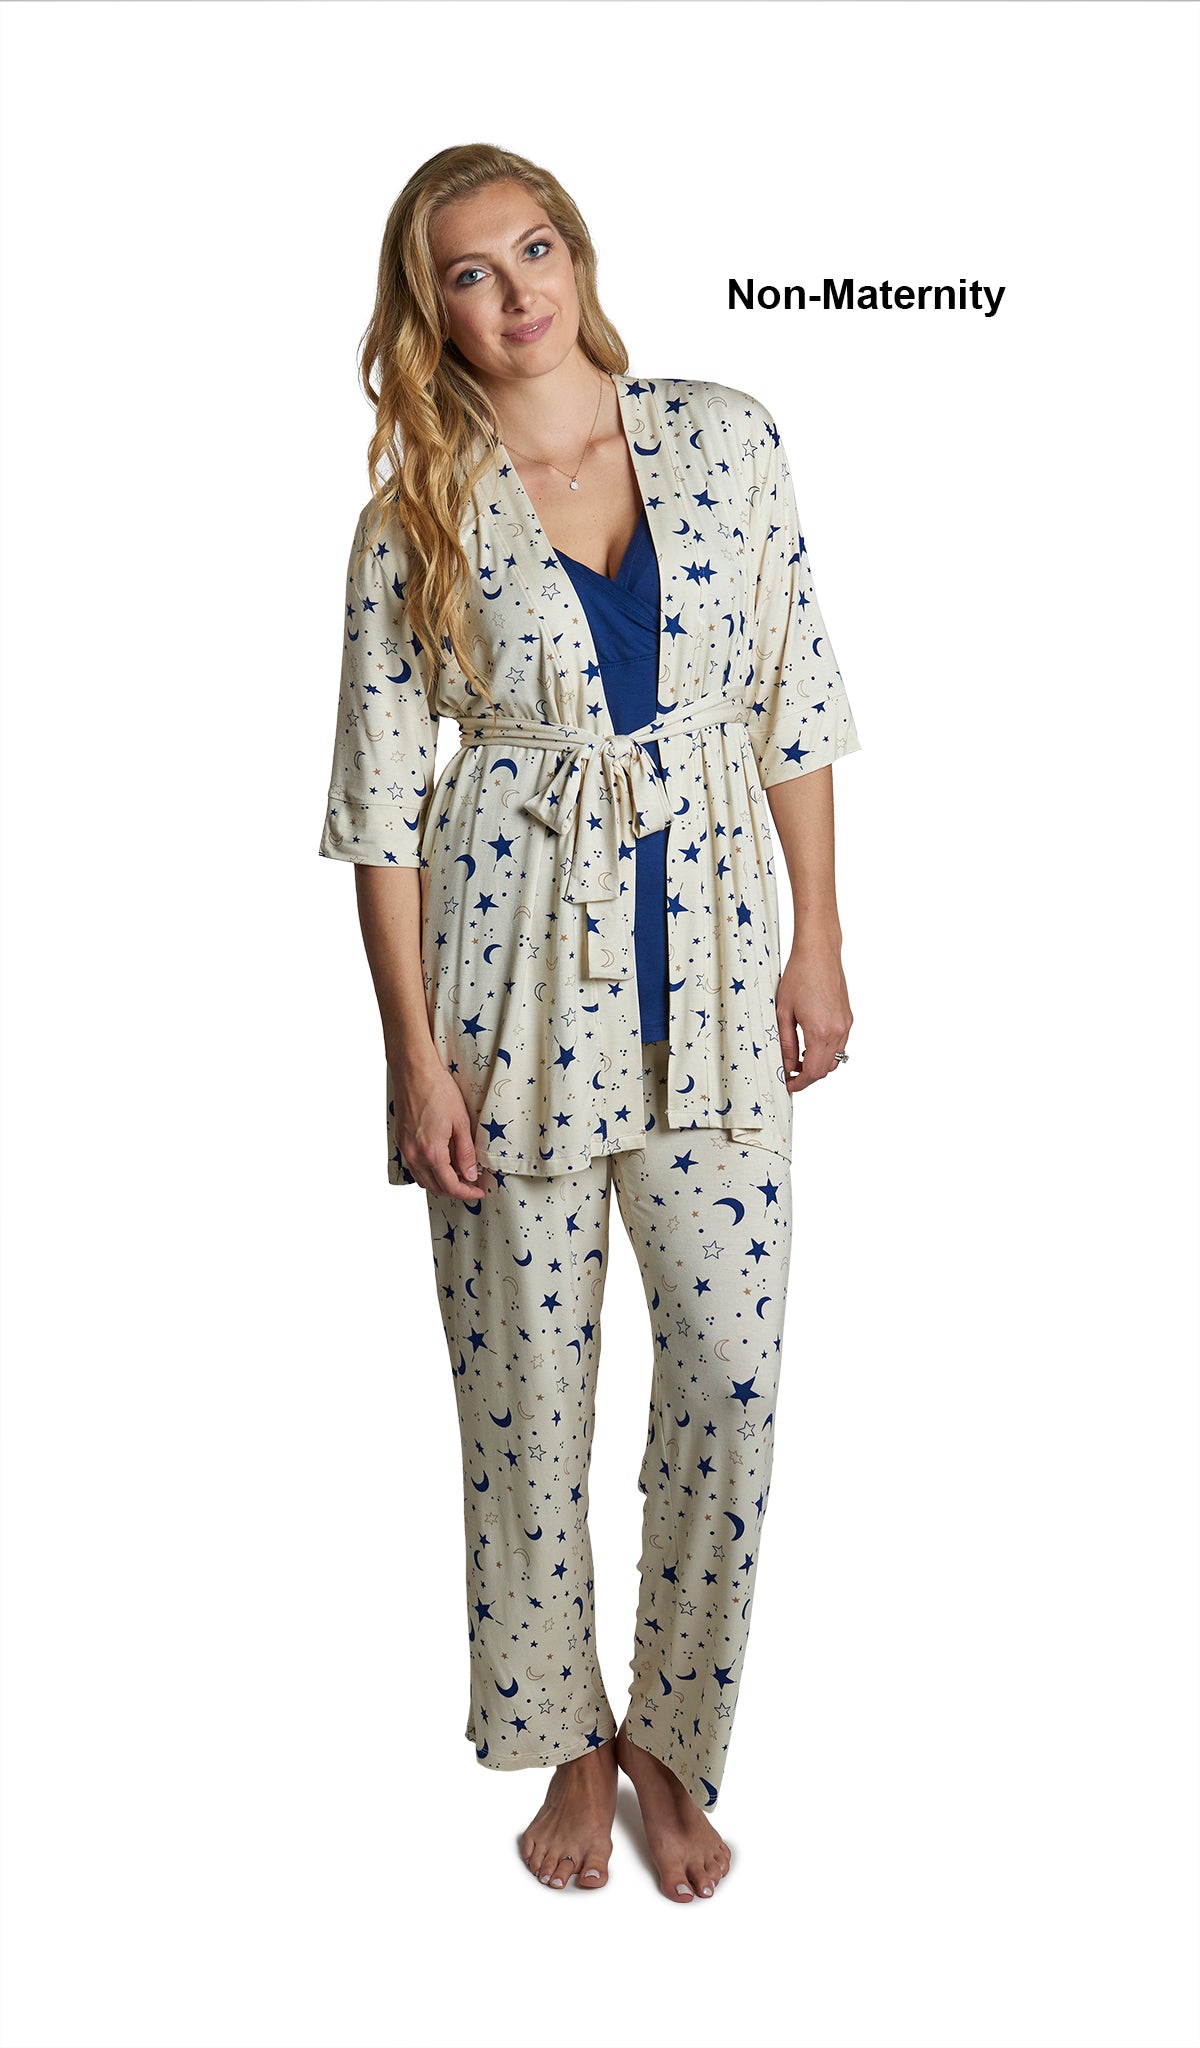 Twinkle Analise 3-Piece Set. Woman wearing 3/4 sleeve robe, tank top and pant as non-maternity.